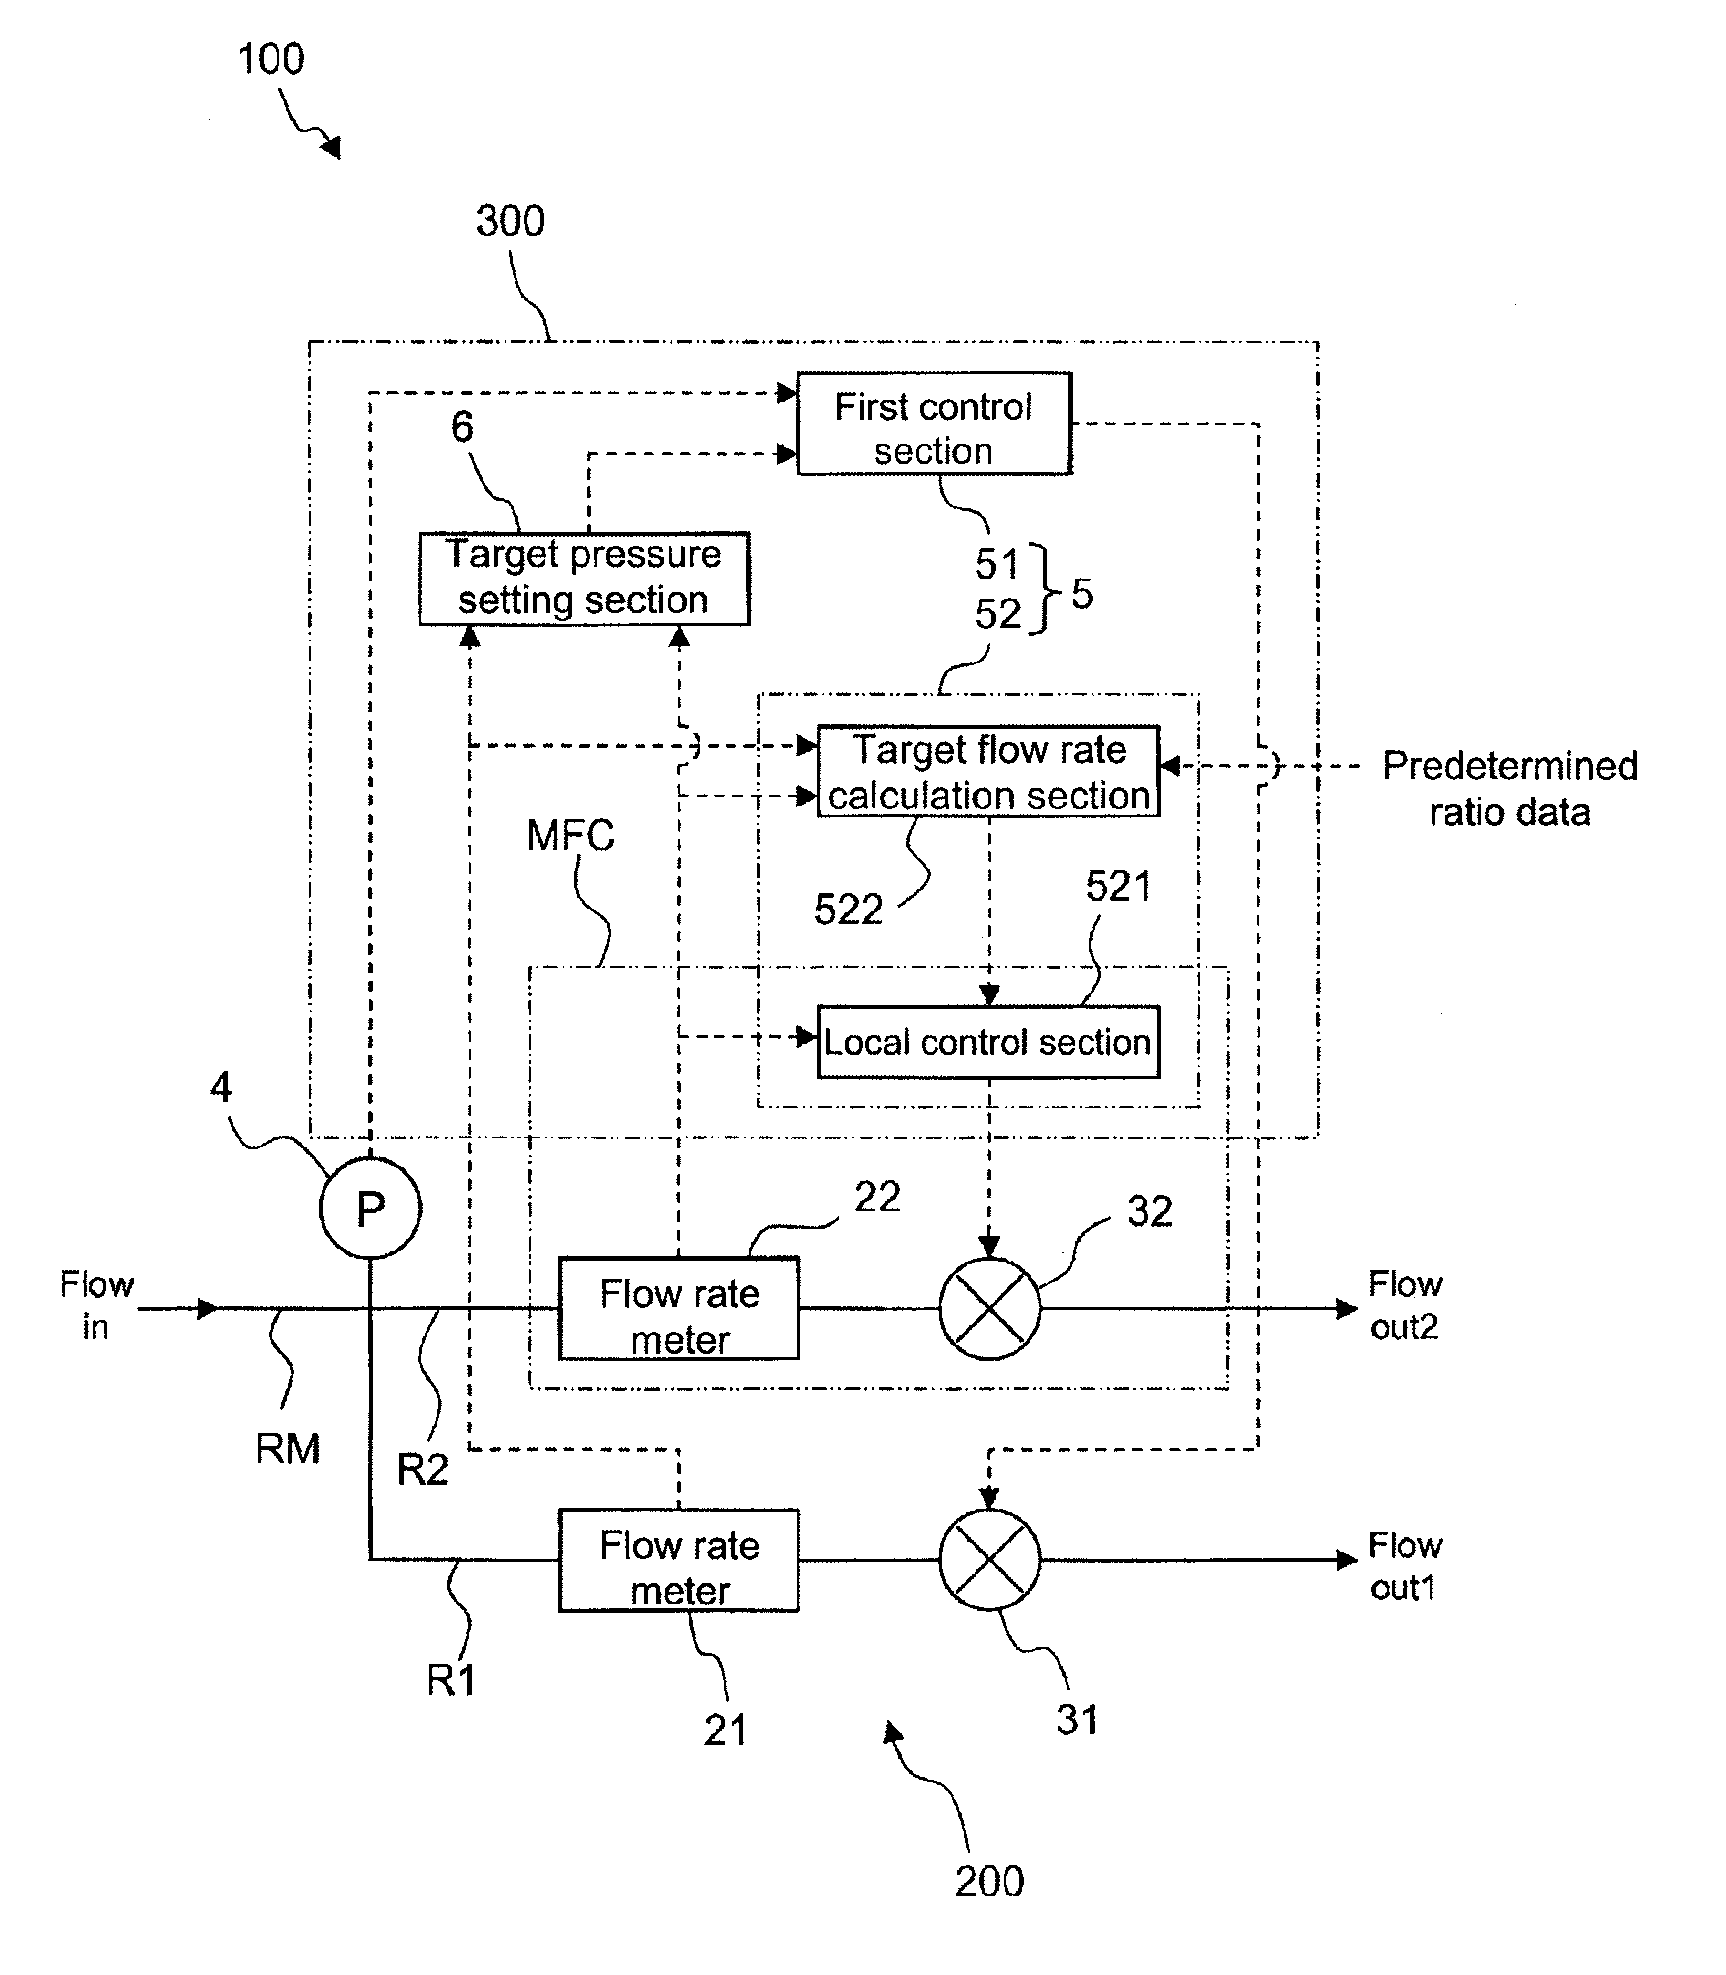 Flow rate ratio control device